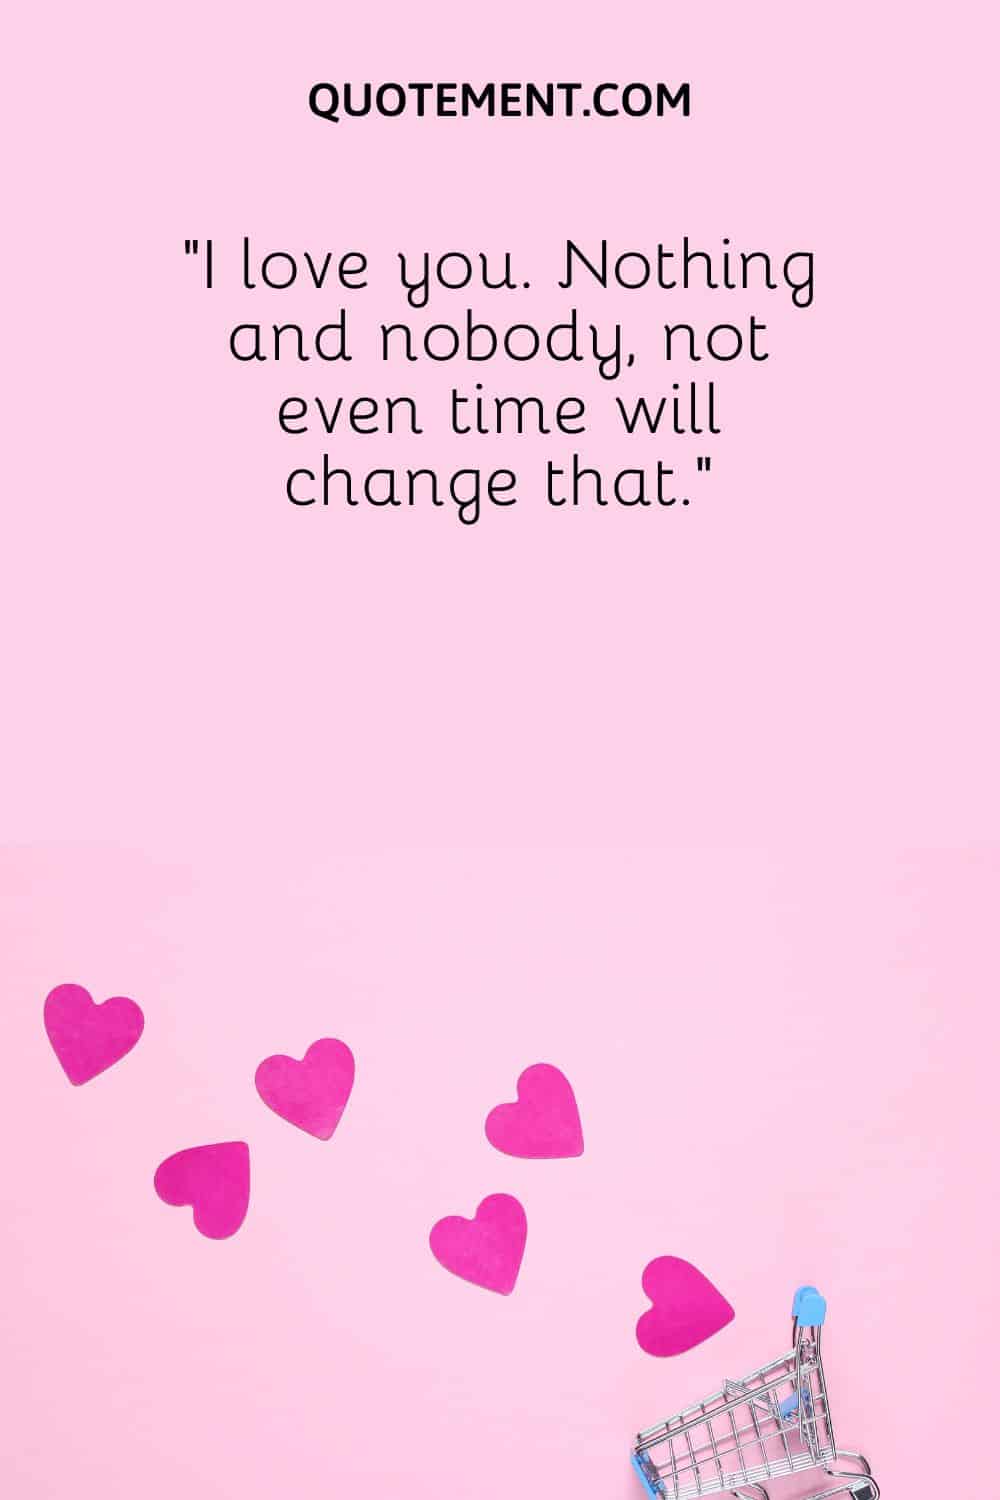 “I love you. Nothing and nobody, not even time will change that.”